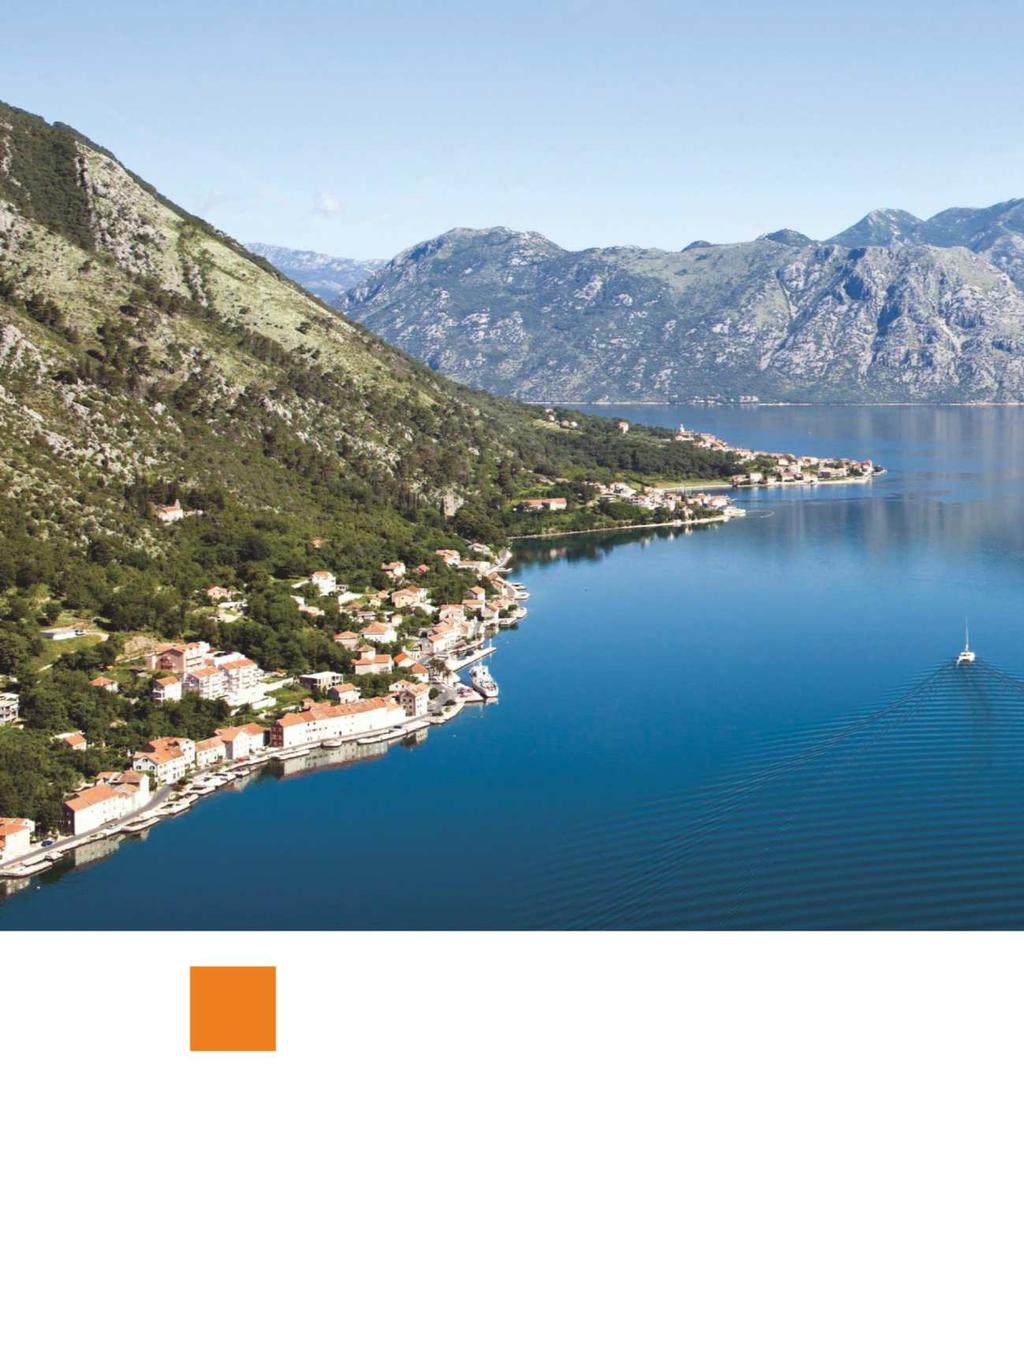 A S M A L L COUNTRY Montenegro is on the up as a superyacht hub in the Adriatic, with ountains like the Alps, fjords like M Norway, architecture like Venice, is how Montenegro is described to me.